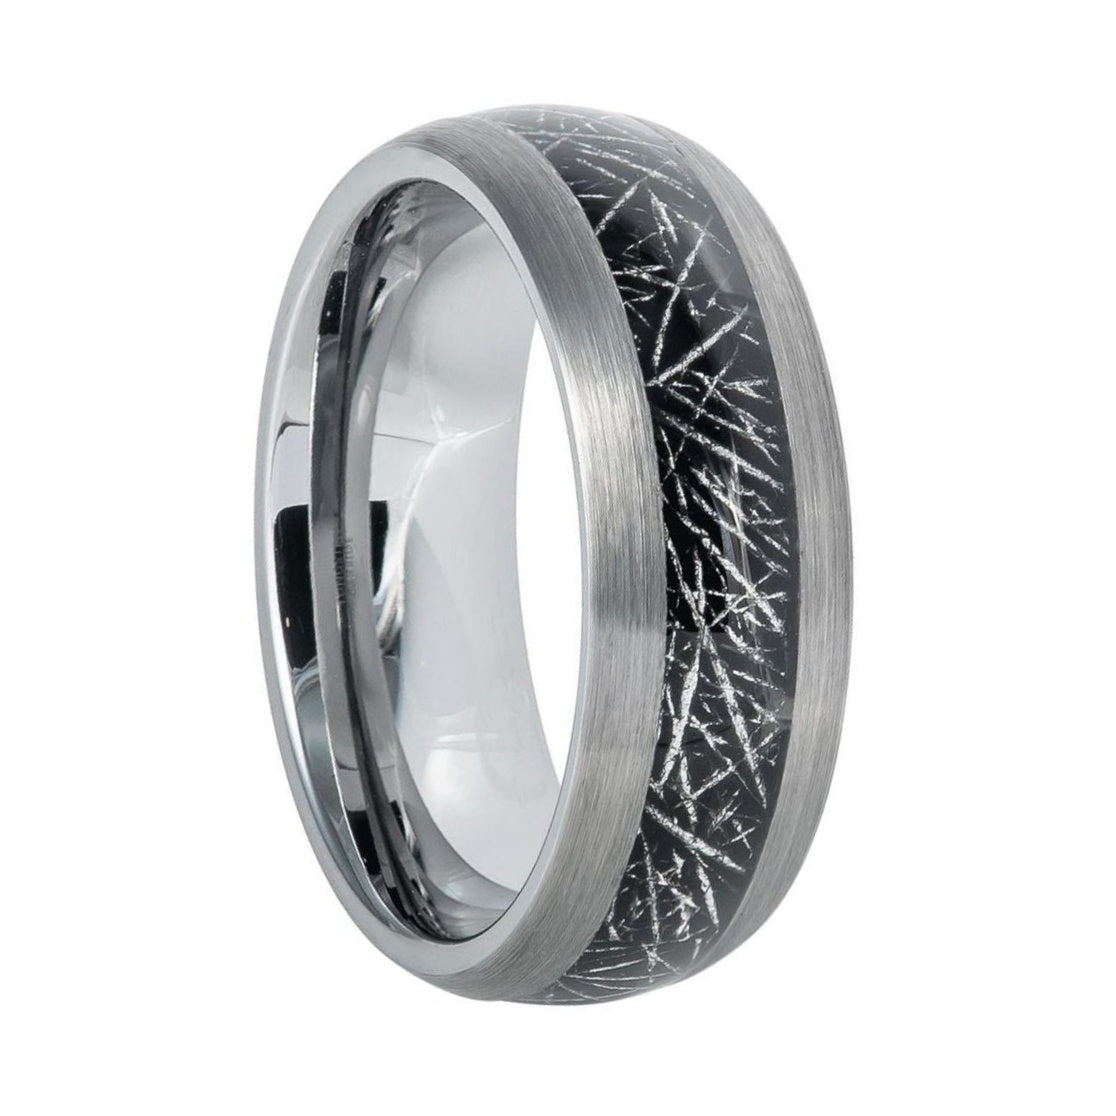 Brushed Tungsten Men's Wedding Band with Silver & Black Carbon Fiber Inlay